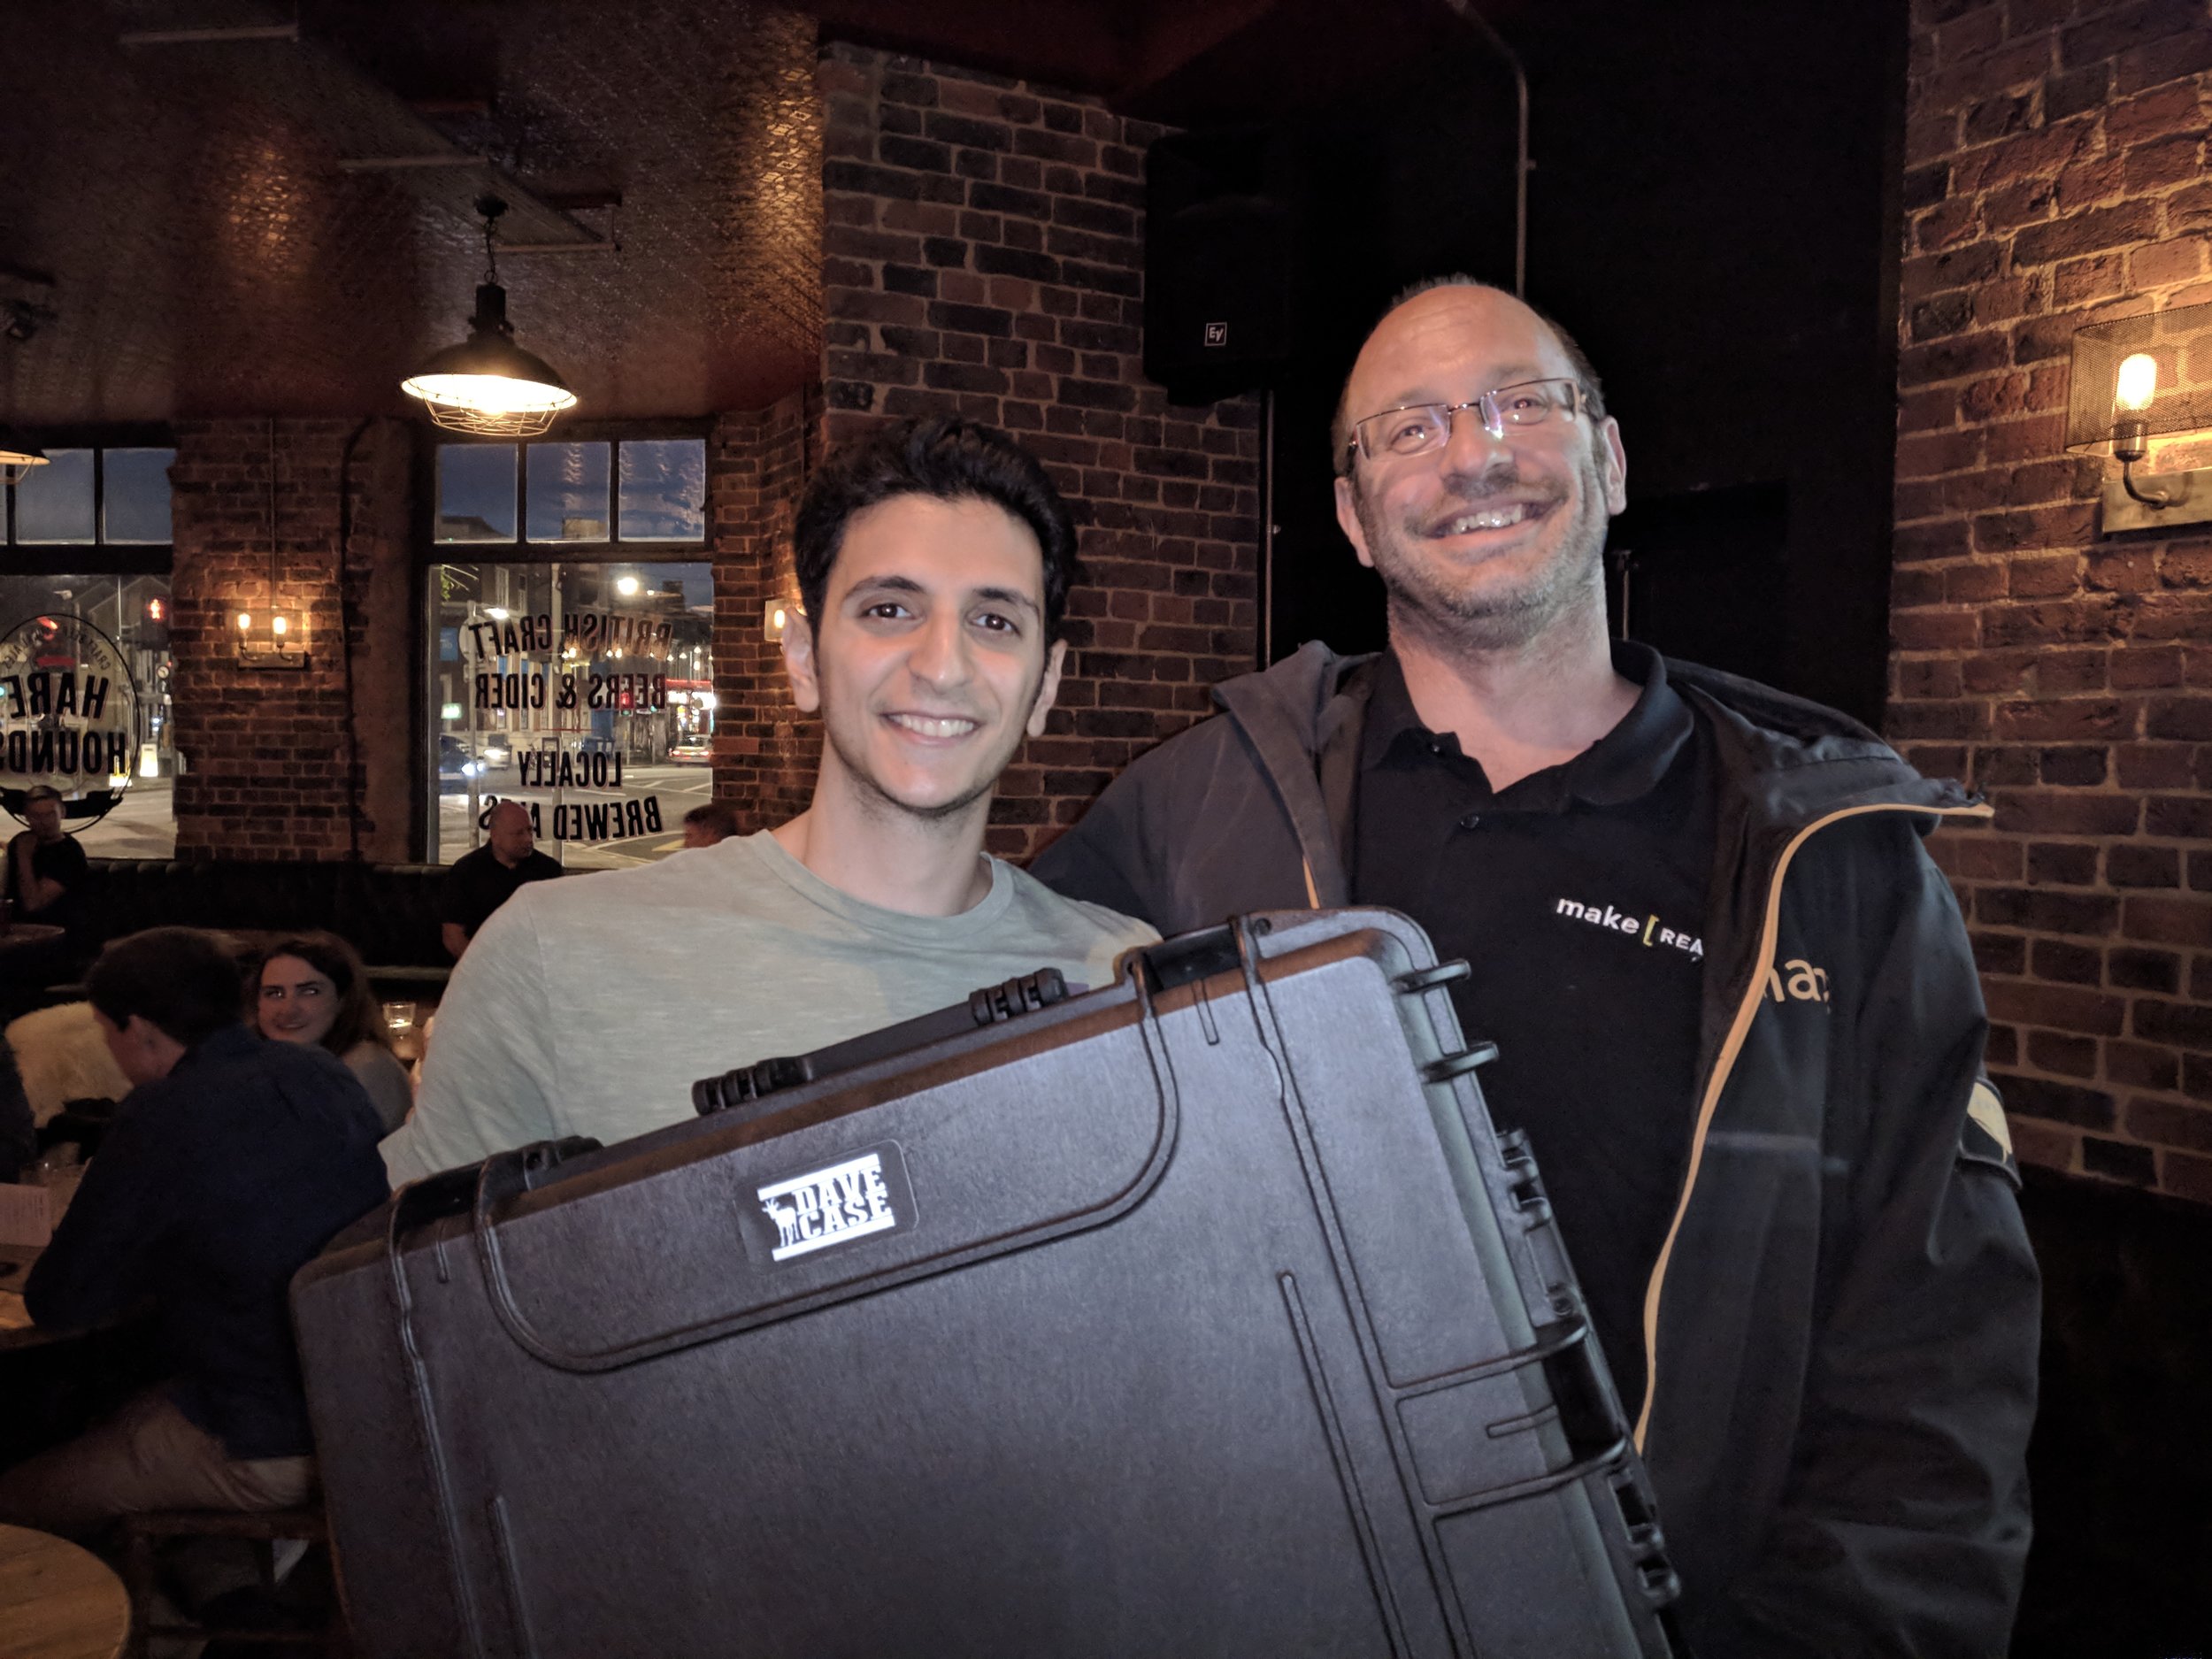 Sam Watts from MakeReal won the HTC Vive case